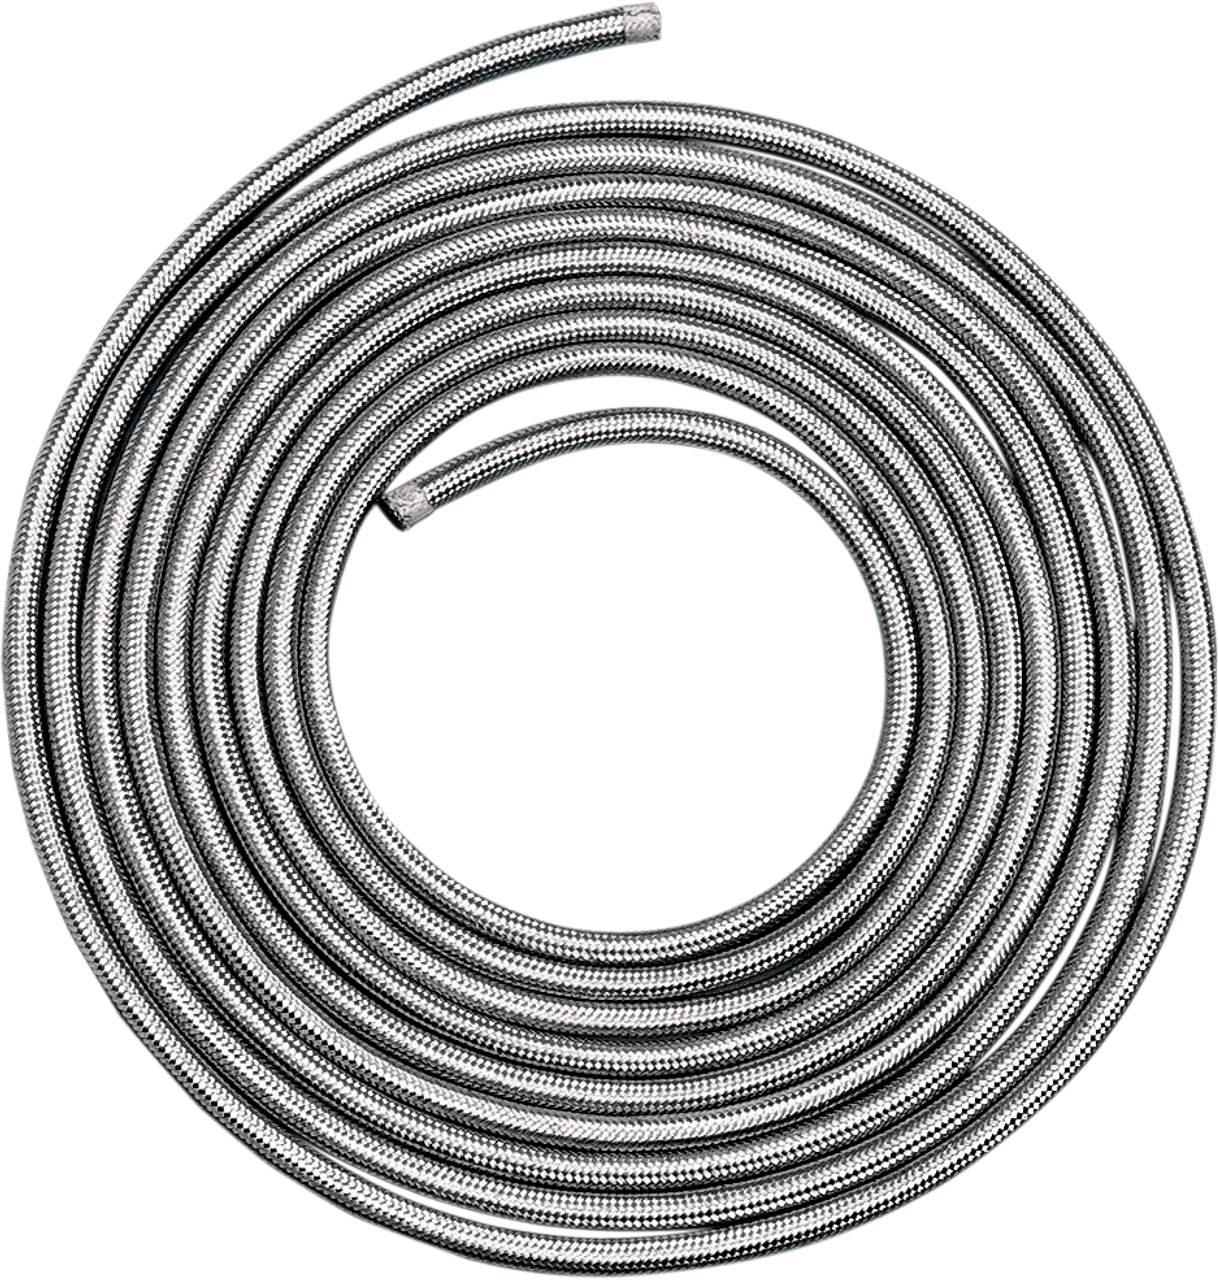 Braided Oil/Fuel Line - Stainless Steel - 3/8" - 25